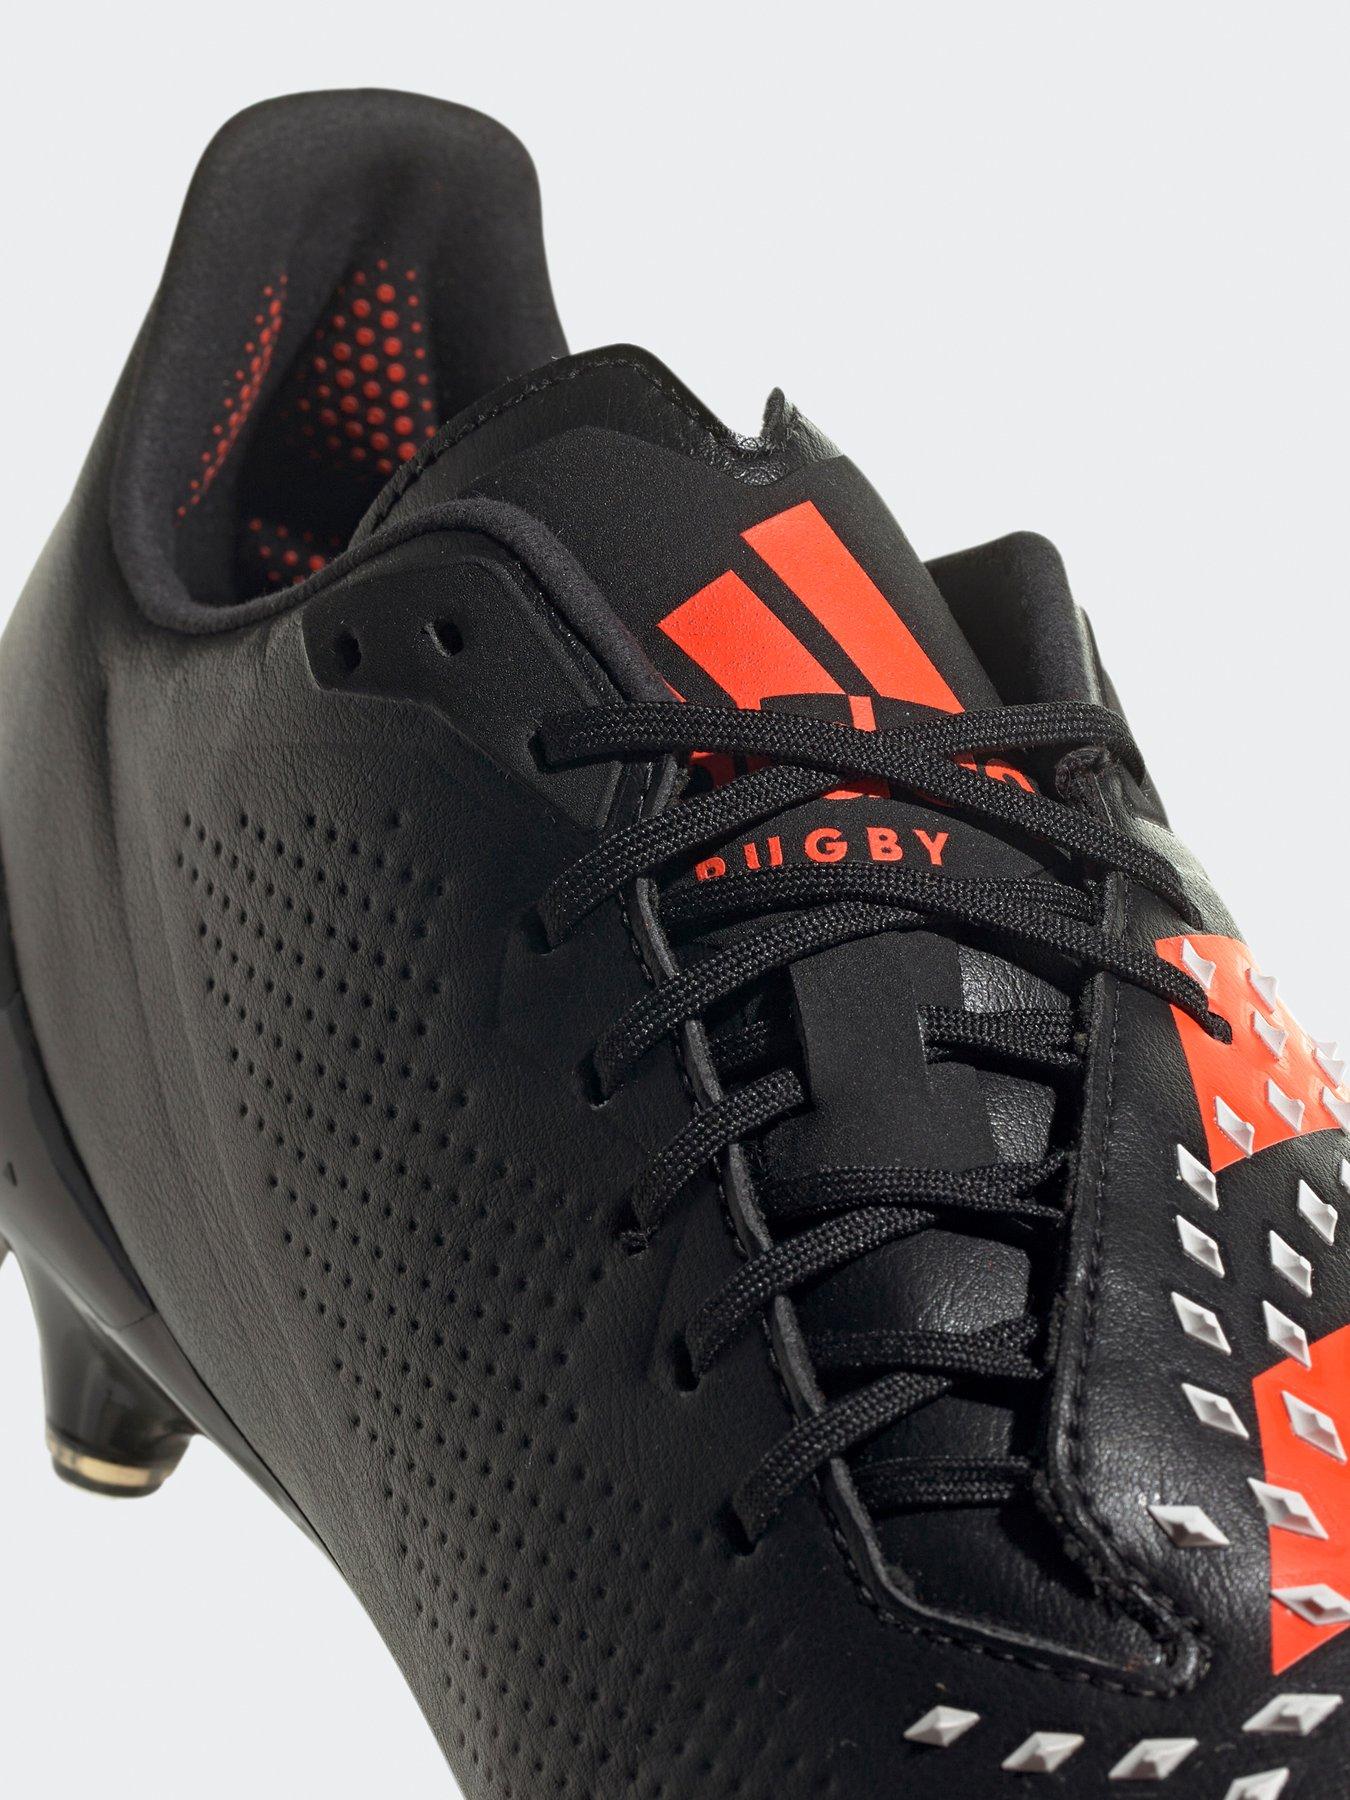  Rugby Predator Malice Sg Boots